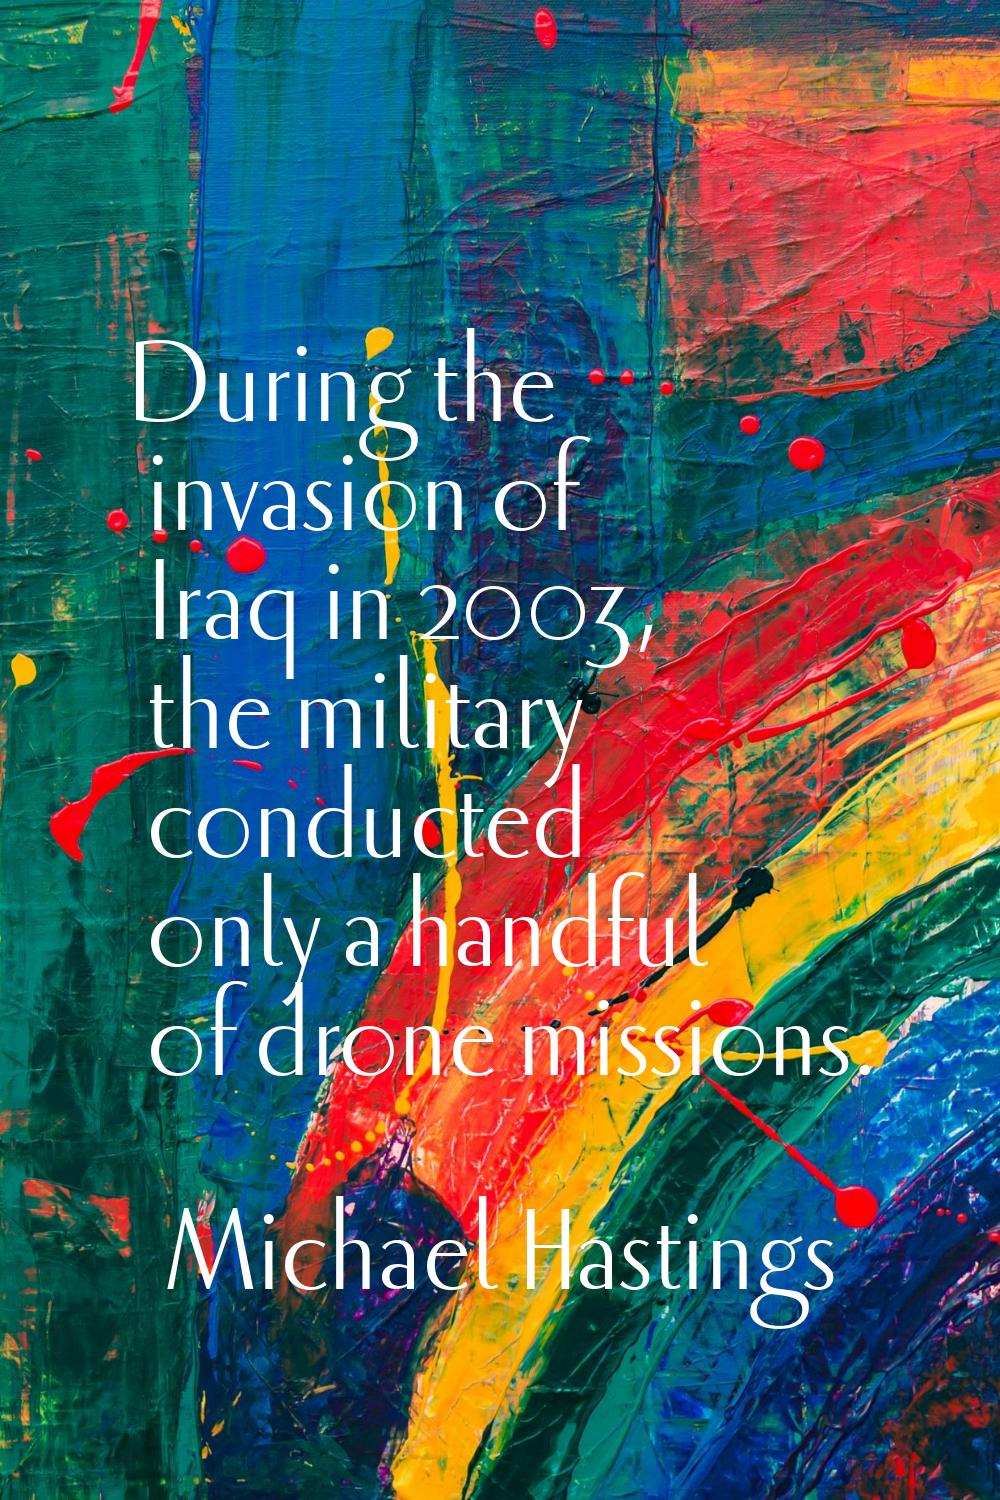 During the invasion of Iraq in 2003, the military conducted only a handful of drone missions.